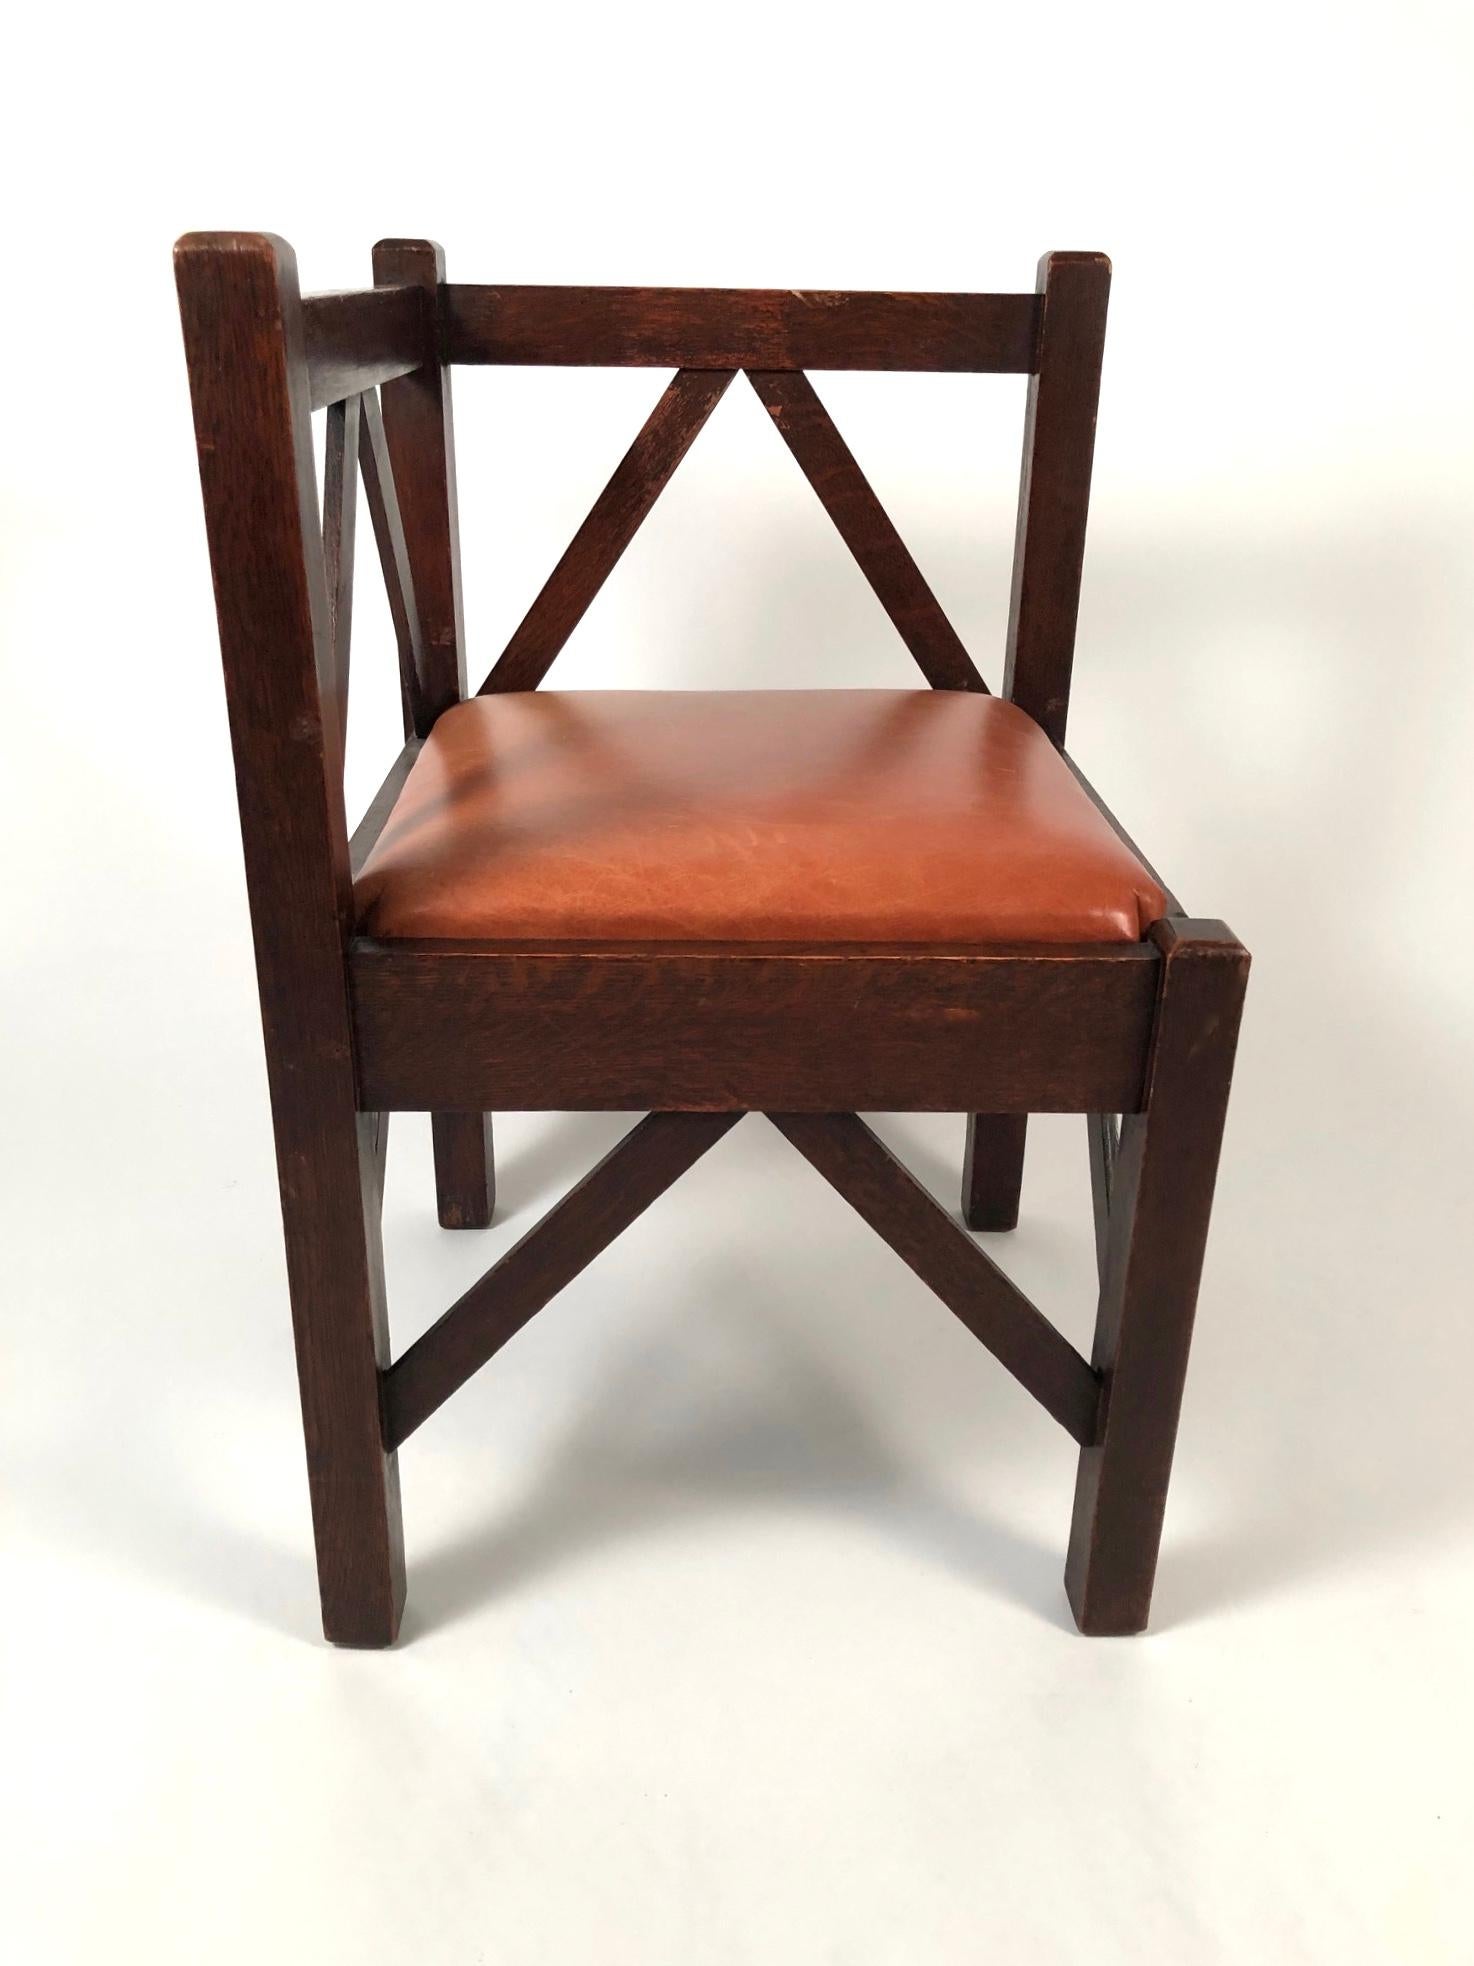 An American Arts & Crafts period corner chair in oak, of wonderfully graphic form and design, in oak, the square section elements-- legs and back rails-- joined by diagonal stretchers which provide strength and give the chair a strikingly modern